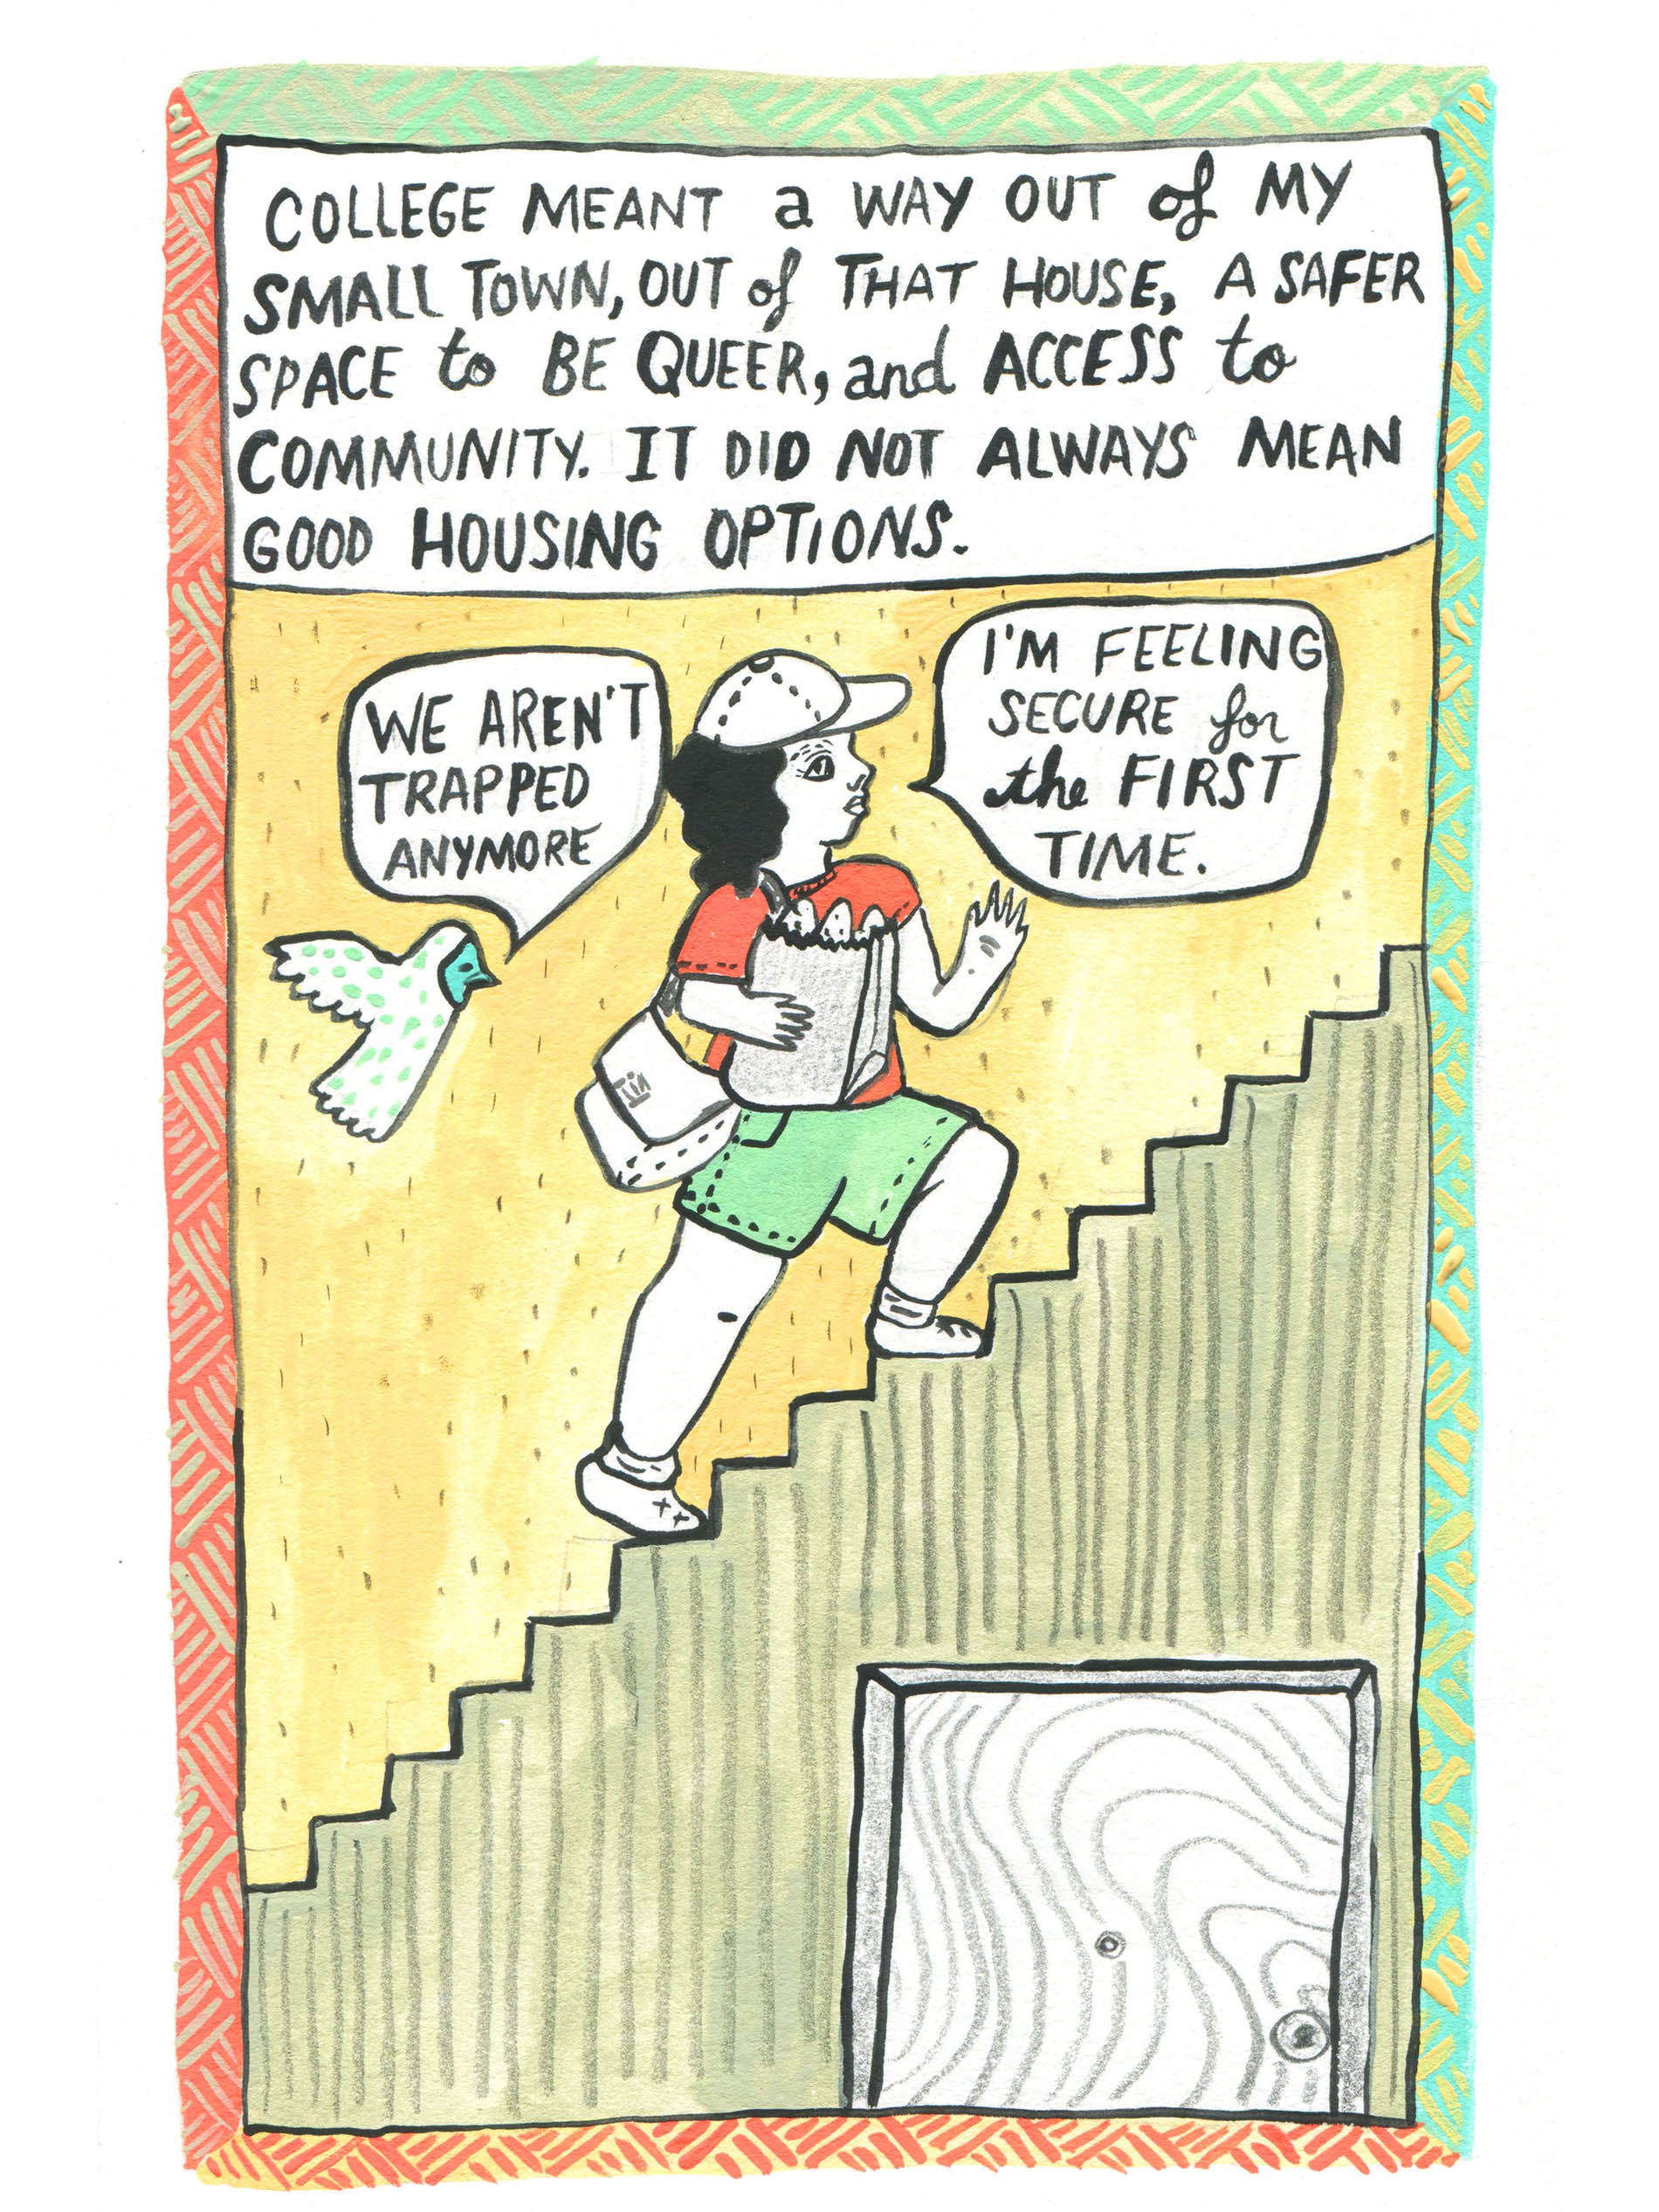 An excerpt of a comic by Erika Rier depicting a person walking up stairs with a speech bubble with text inside that reads, "I'm feeling secure for the first time." and a bird next to them with a speech bubble that reads "we're not trapped anymore."